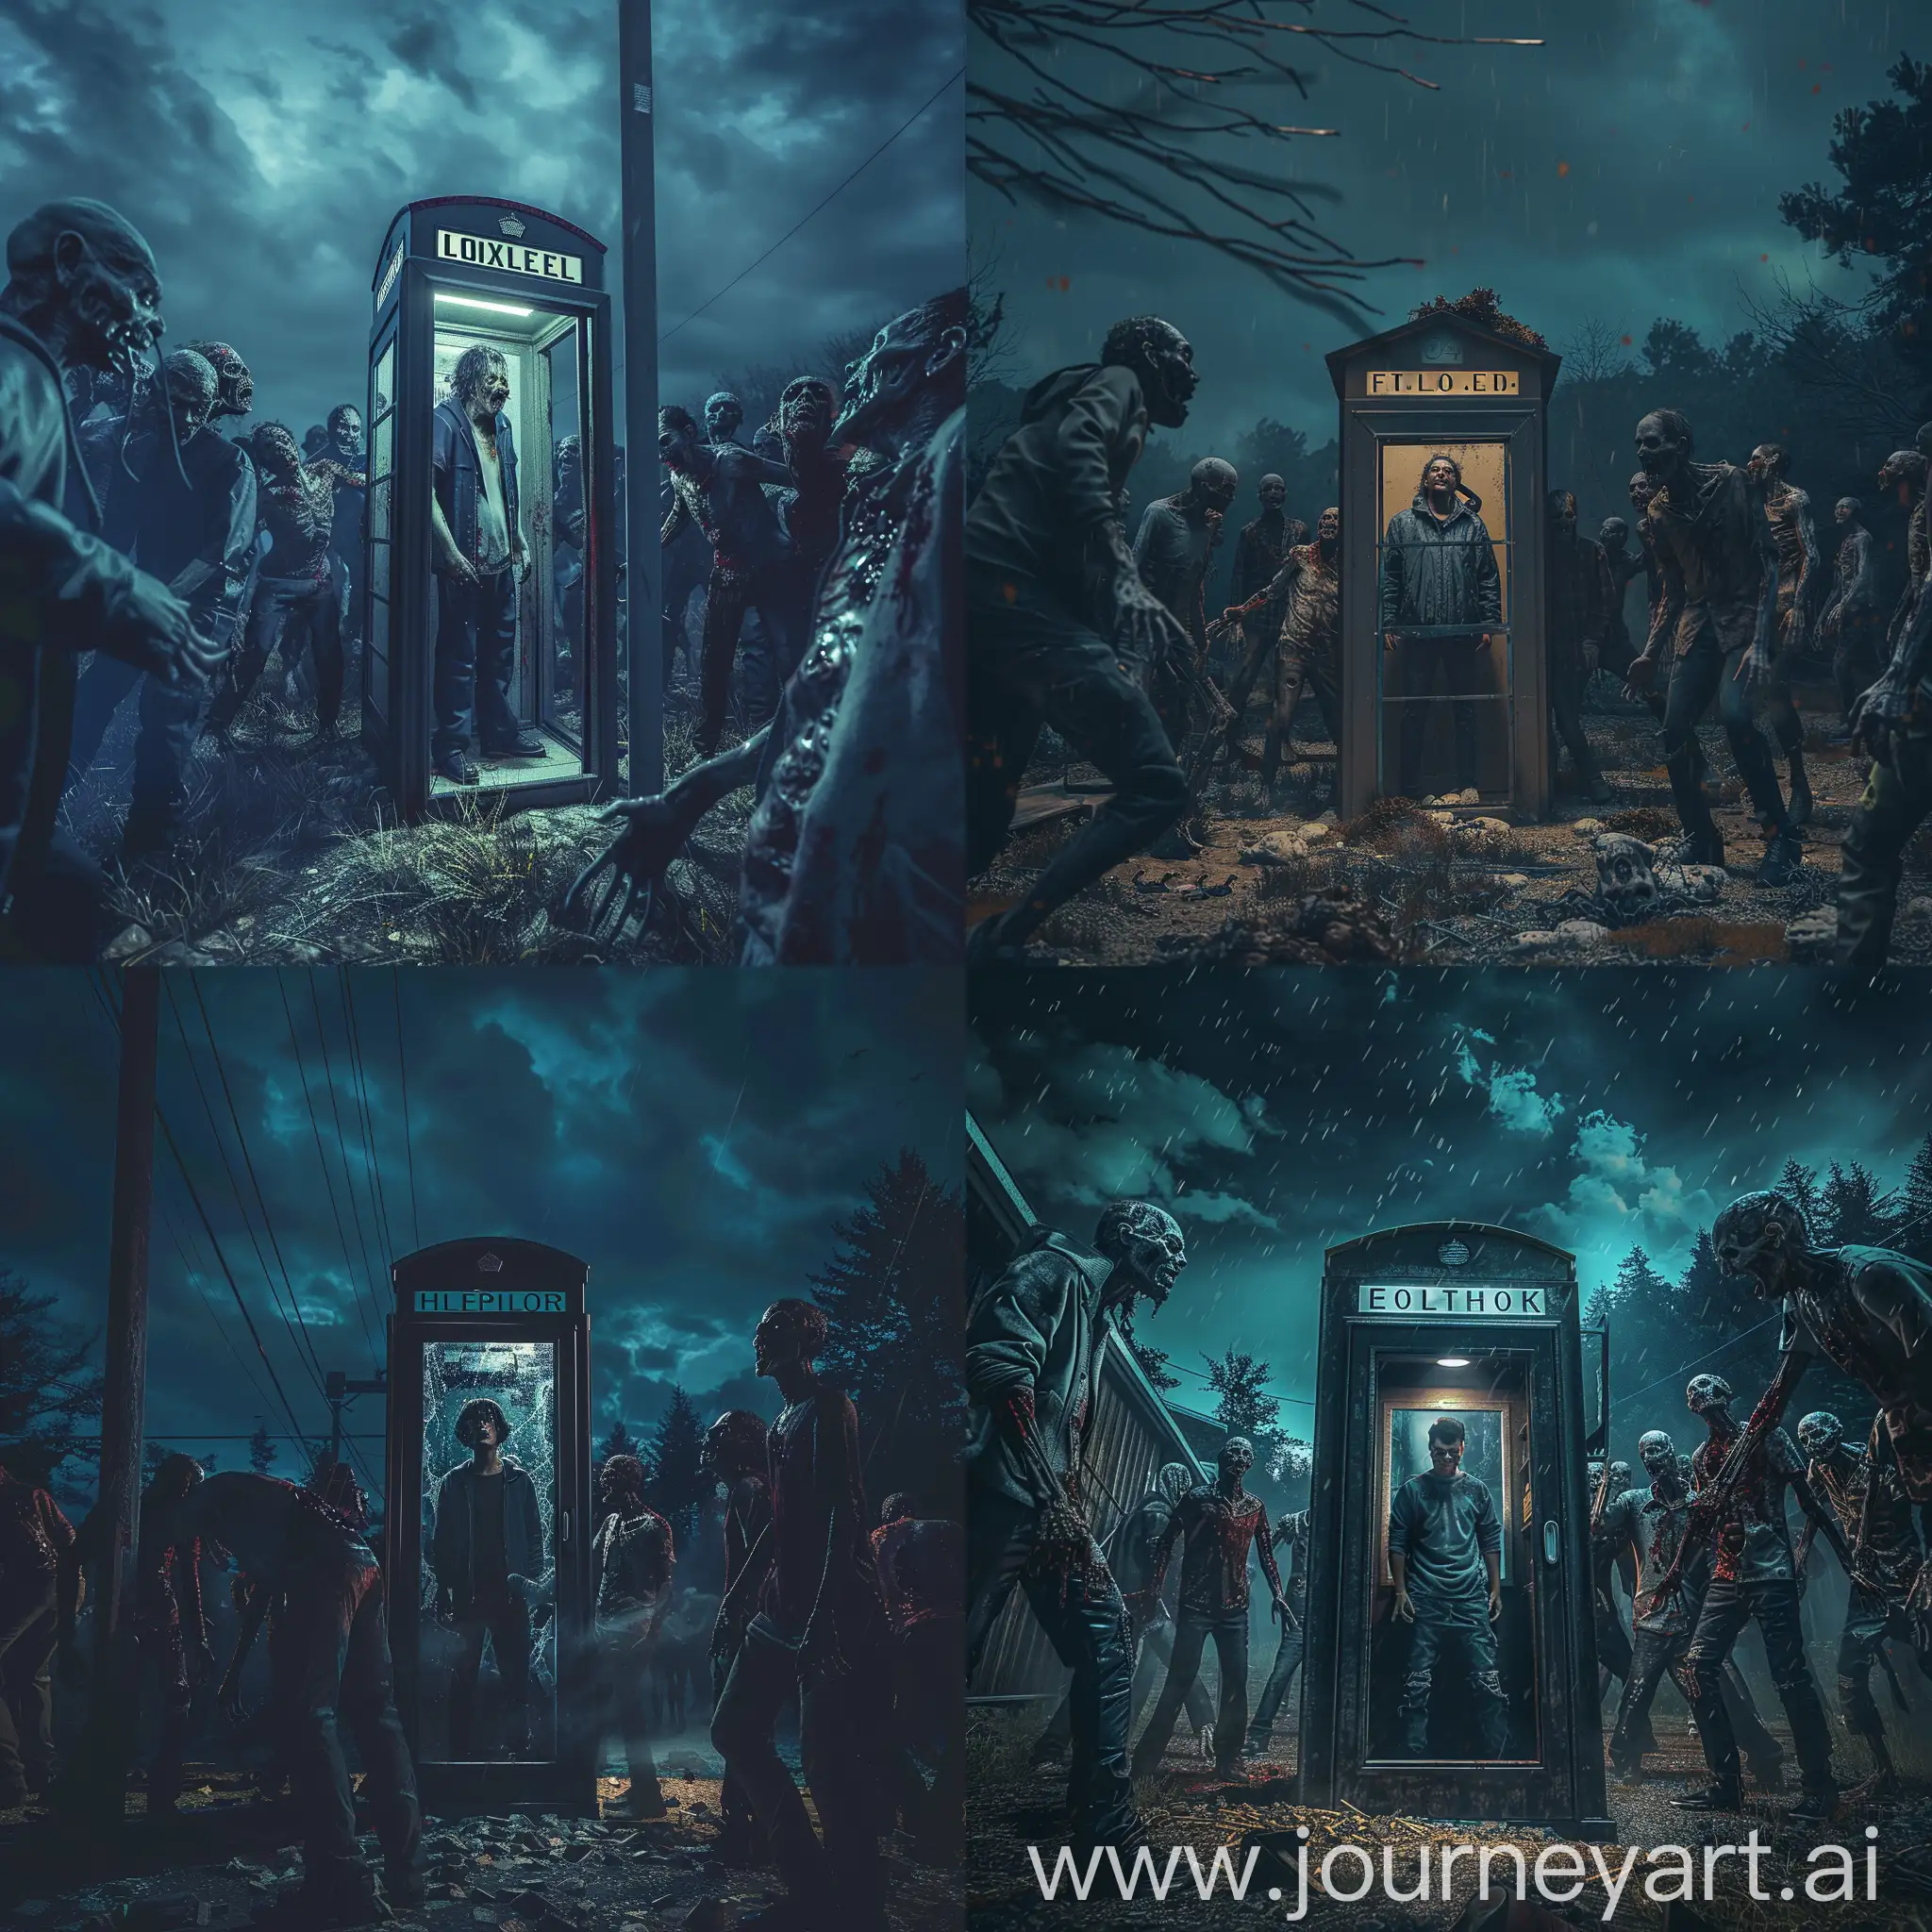 Frightened-Man-Surrounded-by-Realistic-Zombies-in-Nighttime-Telephone-Booth